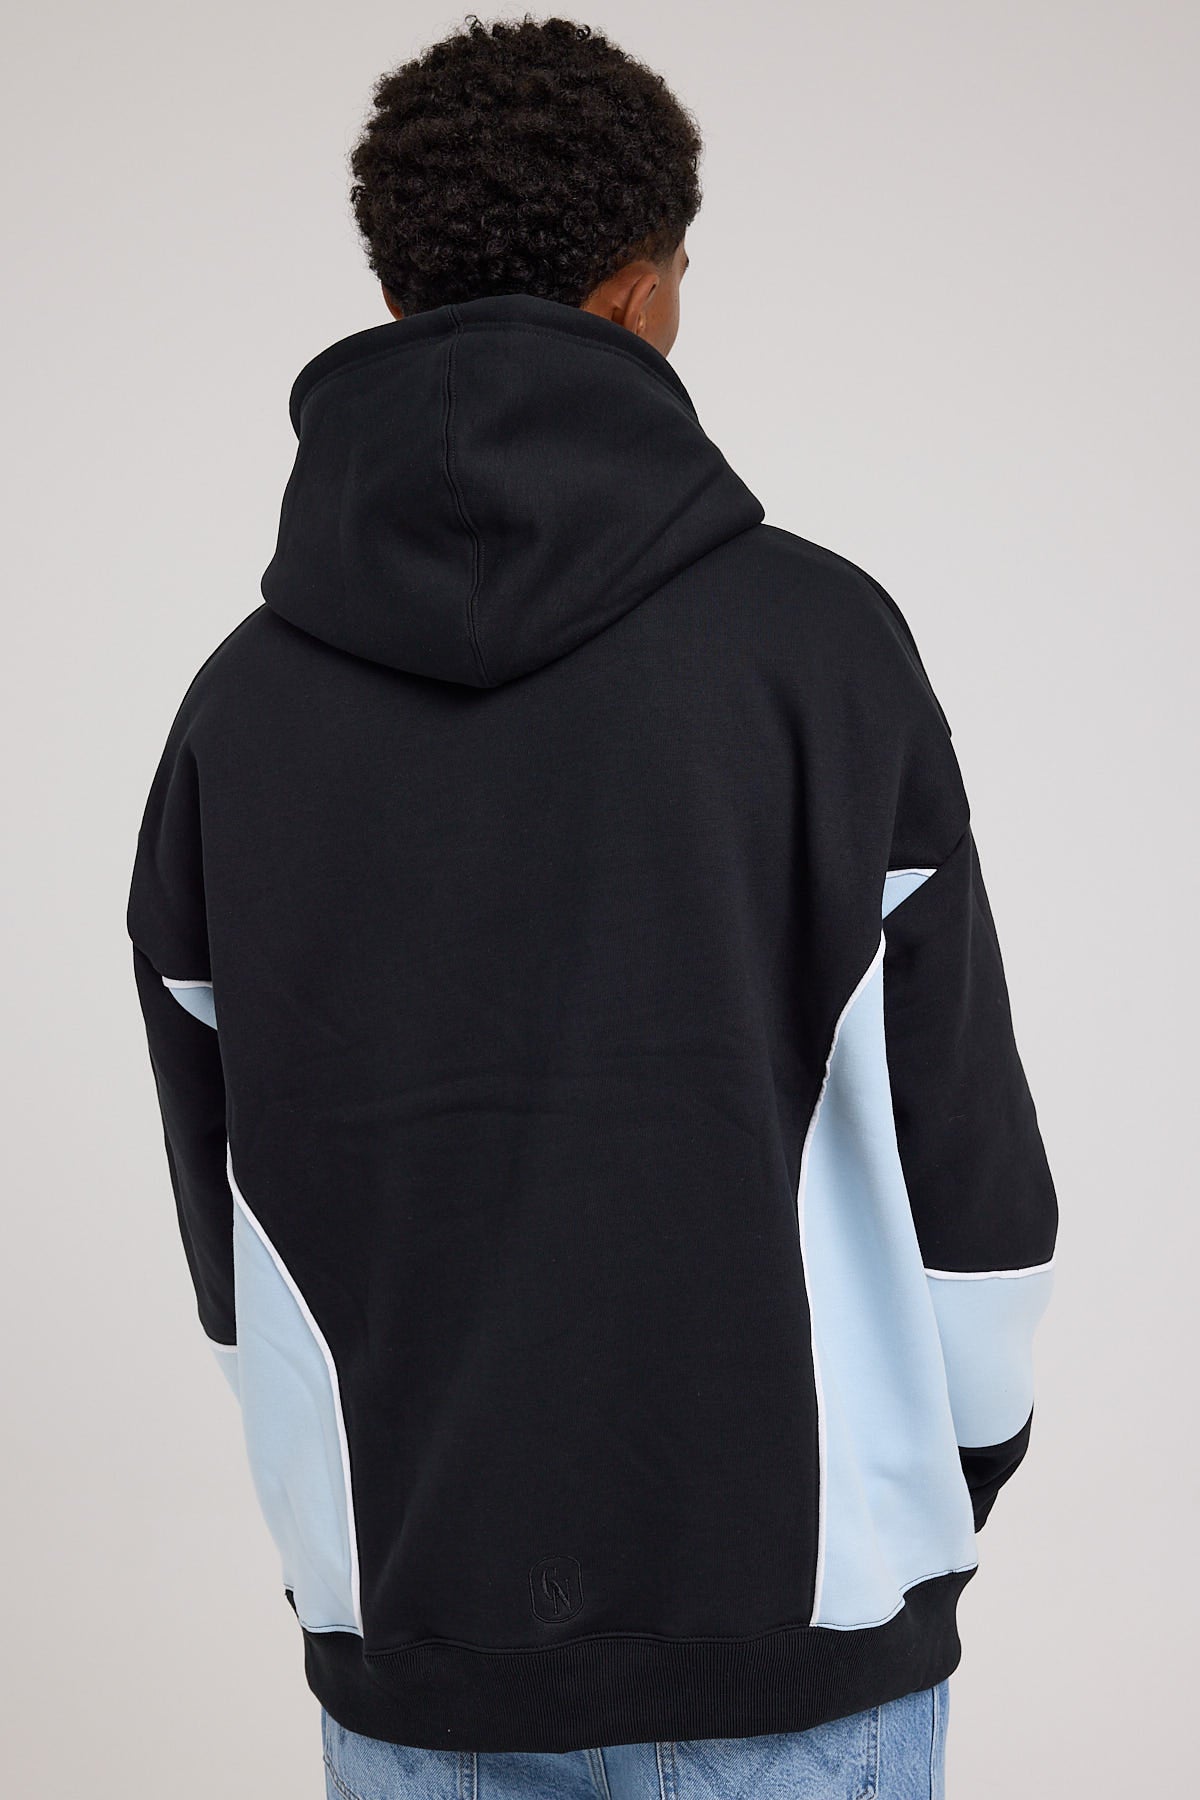 Common Need Mascot Panelled Hoodie Charcoal